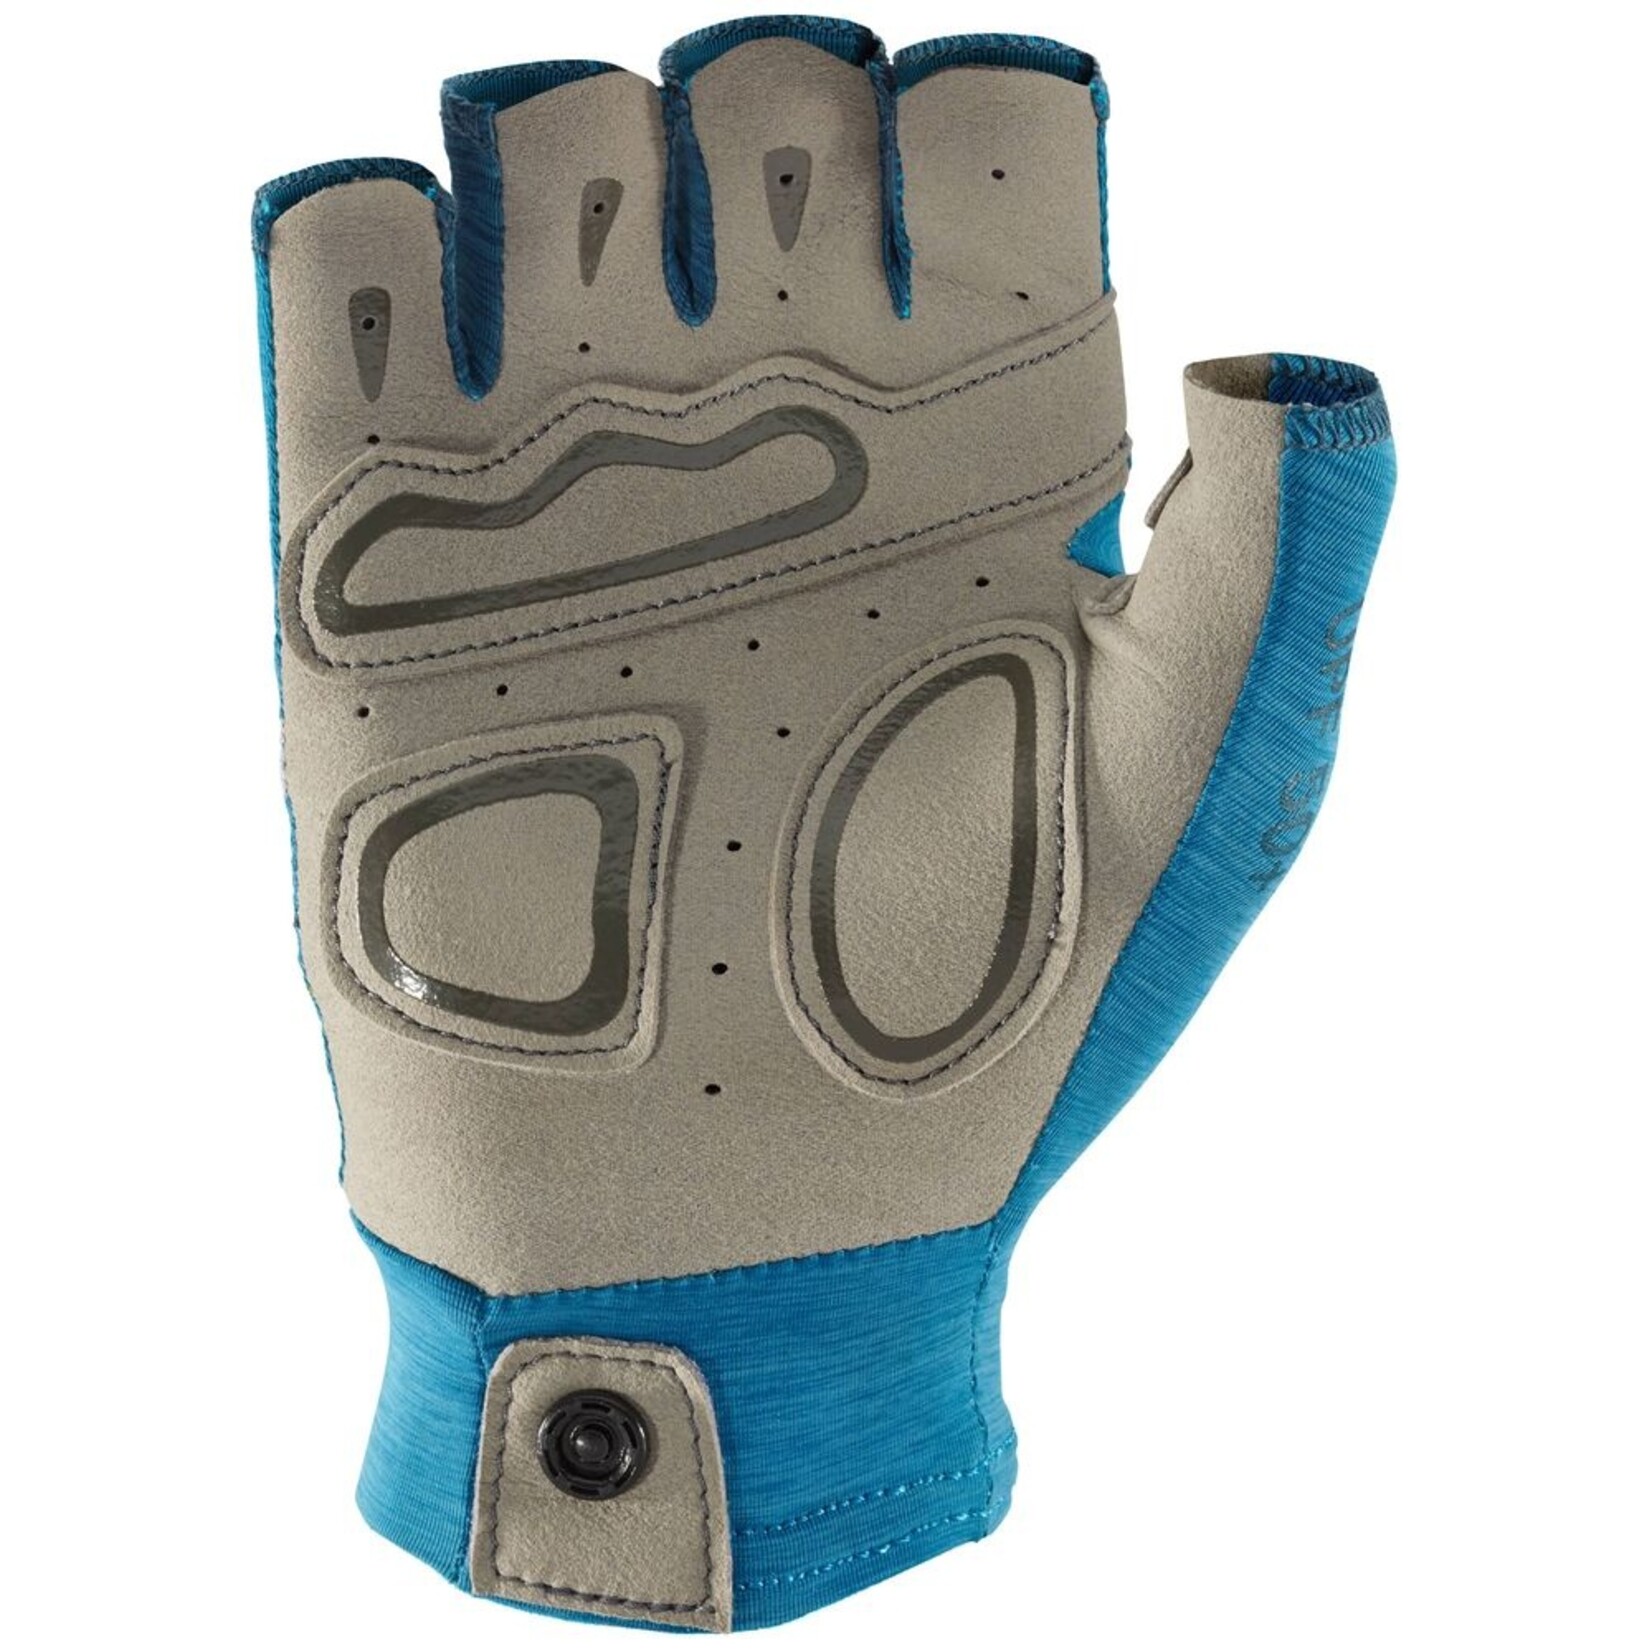 NRS - Women's Boater's Glove